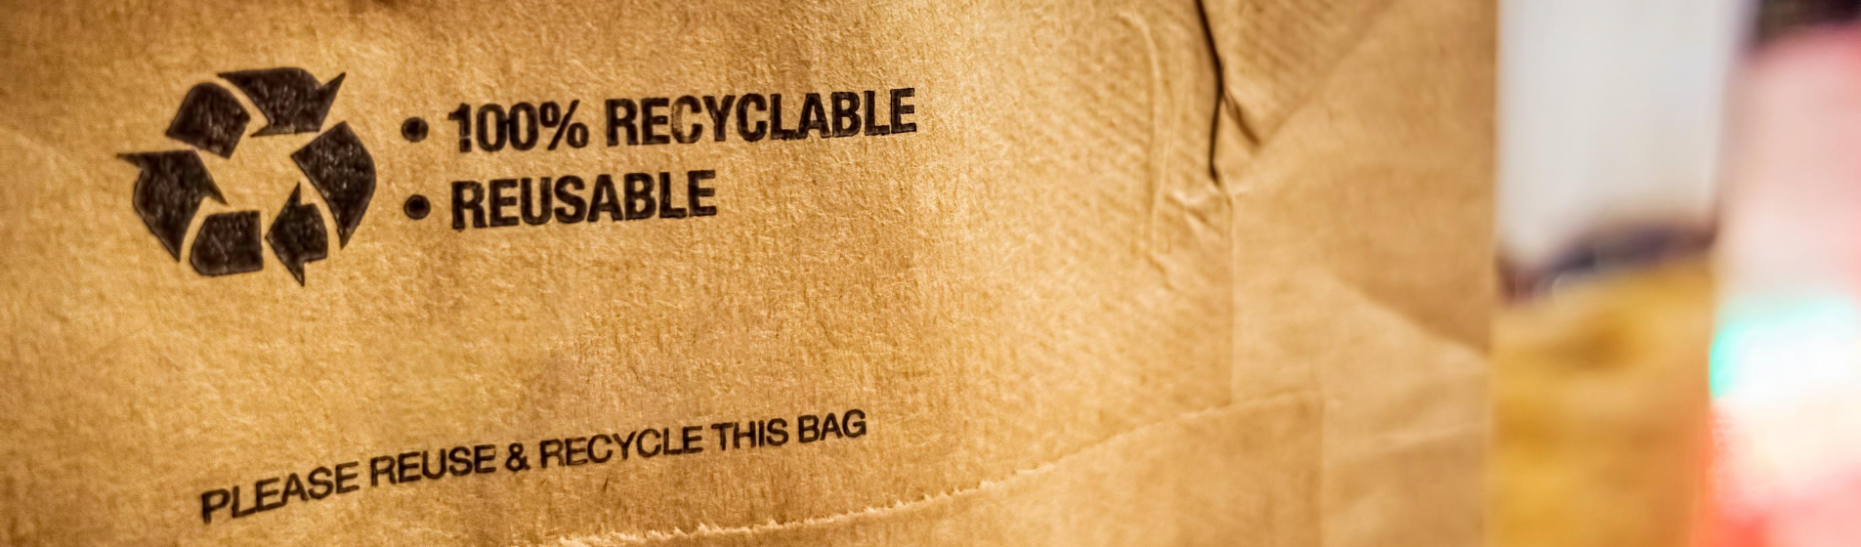 Brown Reusable and Recyclable Bag